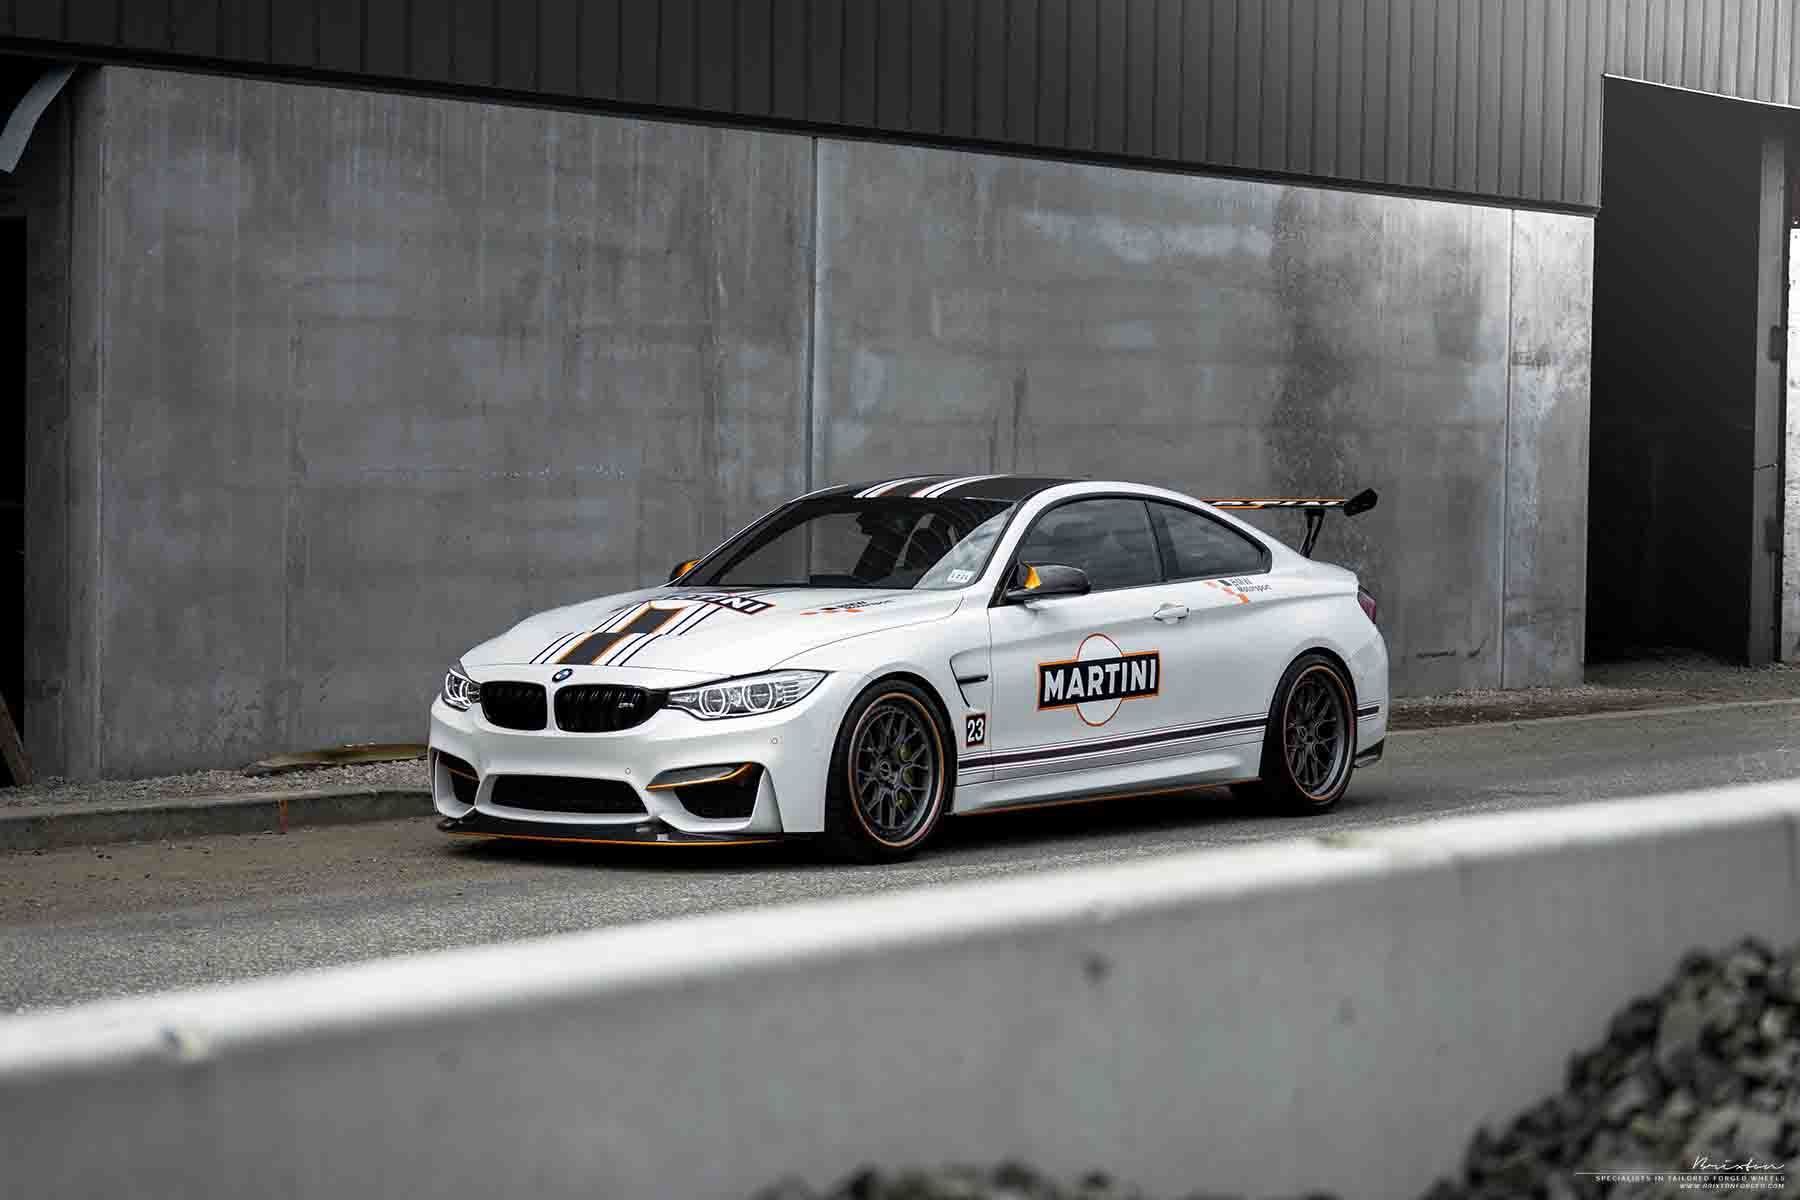 images-products-1-2679-232974967-white-bmw-m4-gts-martini-brixton-forged-cm16-wheels-cm16-circuit-series-kingsport-grey-concave-o.jpg